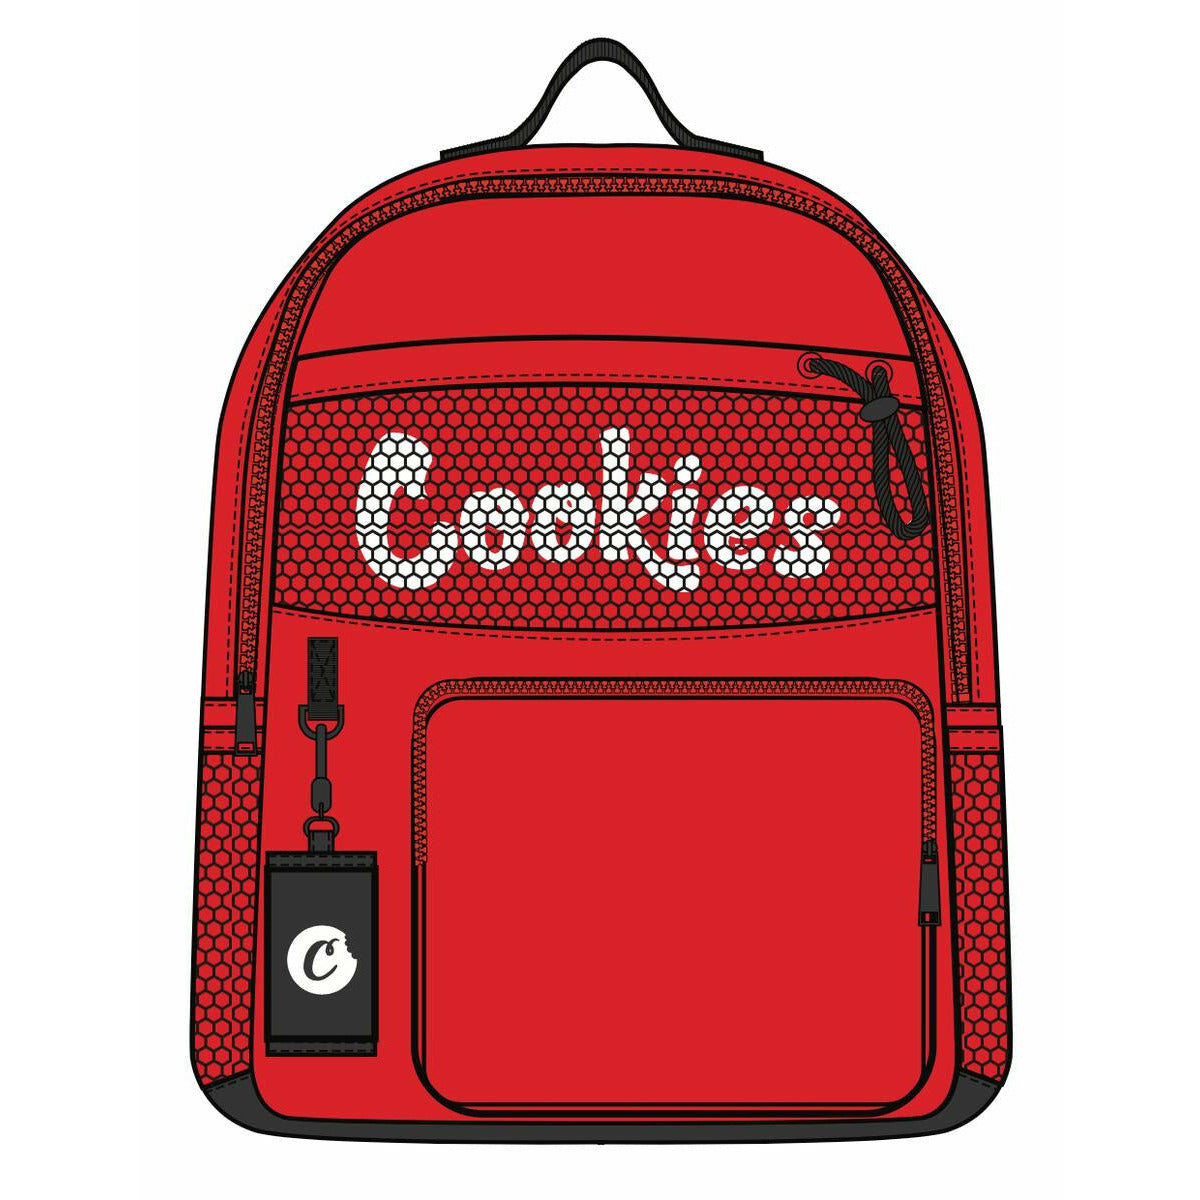 Cookies Stasher Smell Proof Red Backpack (1550A4888)